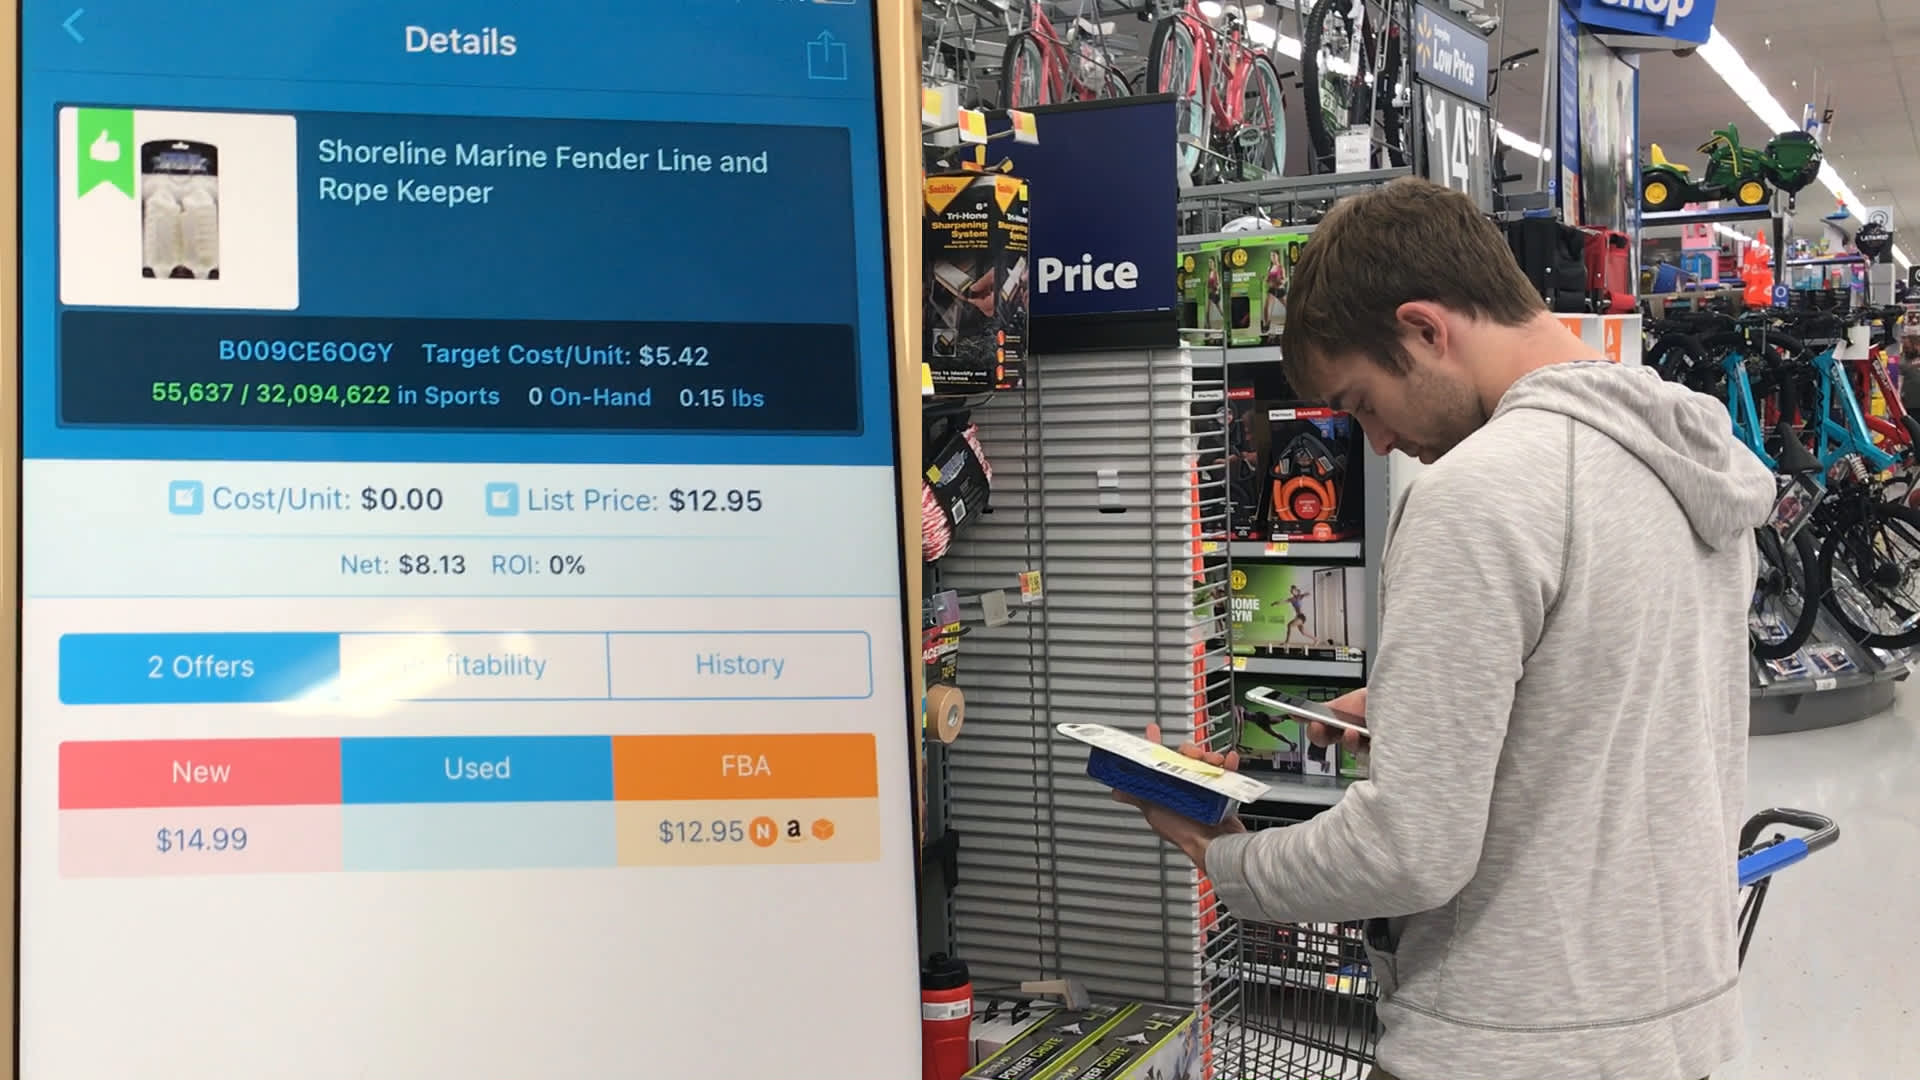 Grant scans items using InventoryLab's Scoutify 2 app (left) which reveals detailed sales data for a given product on Amazon.